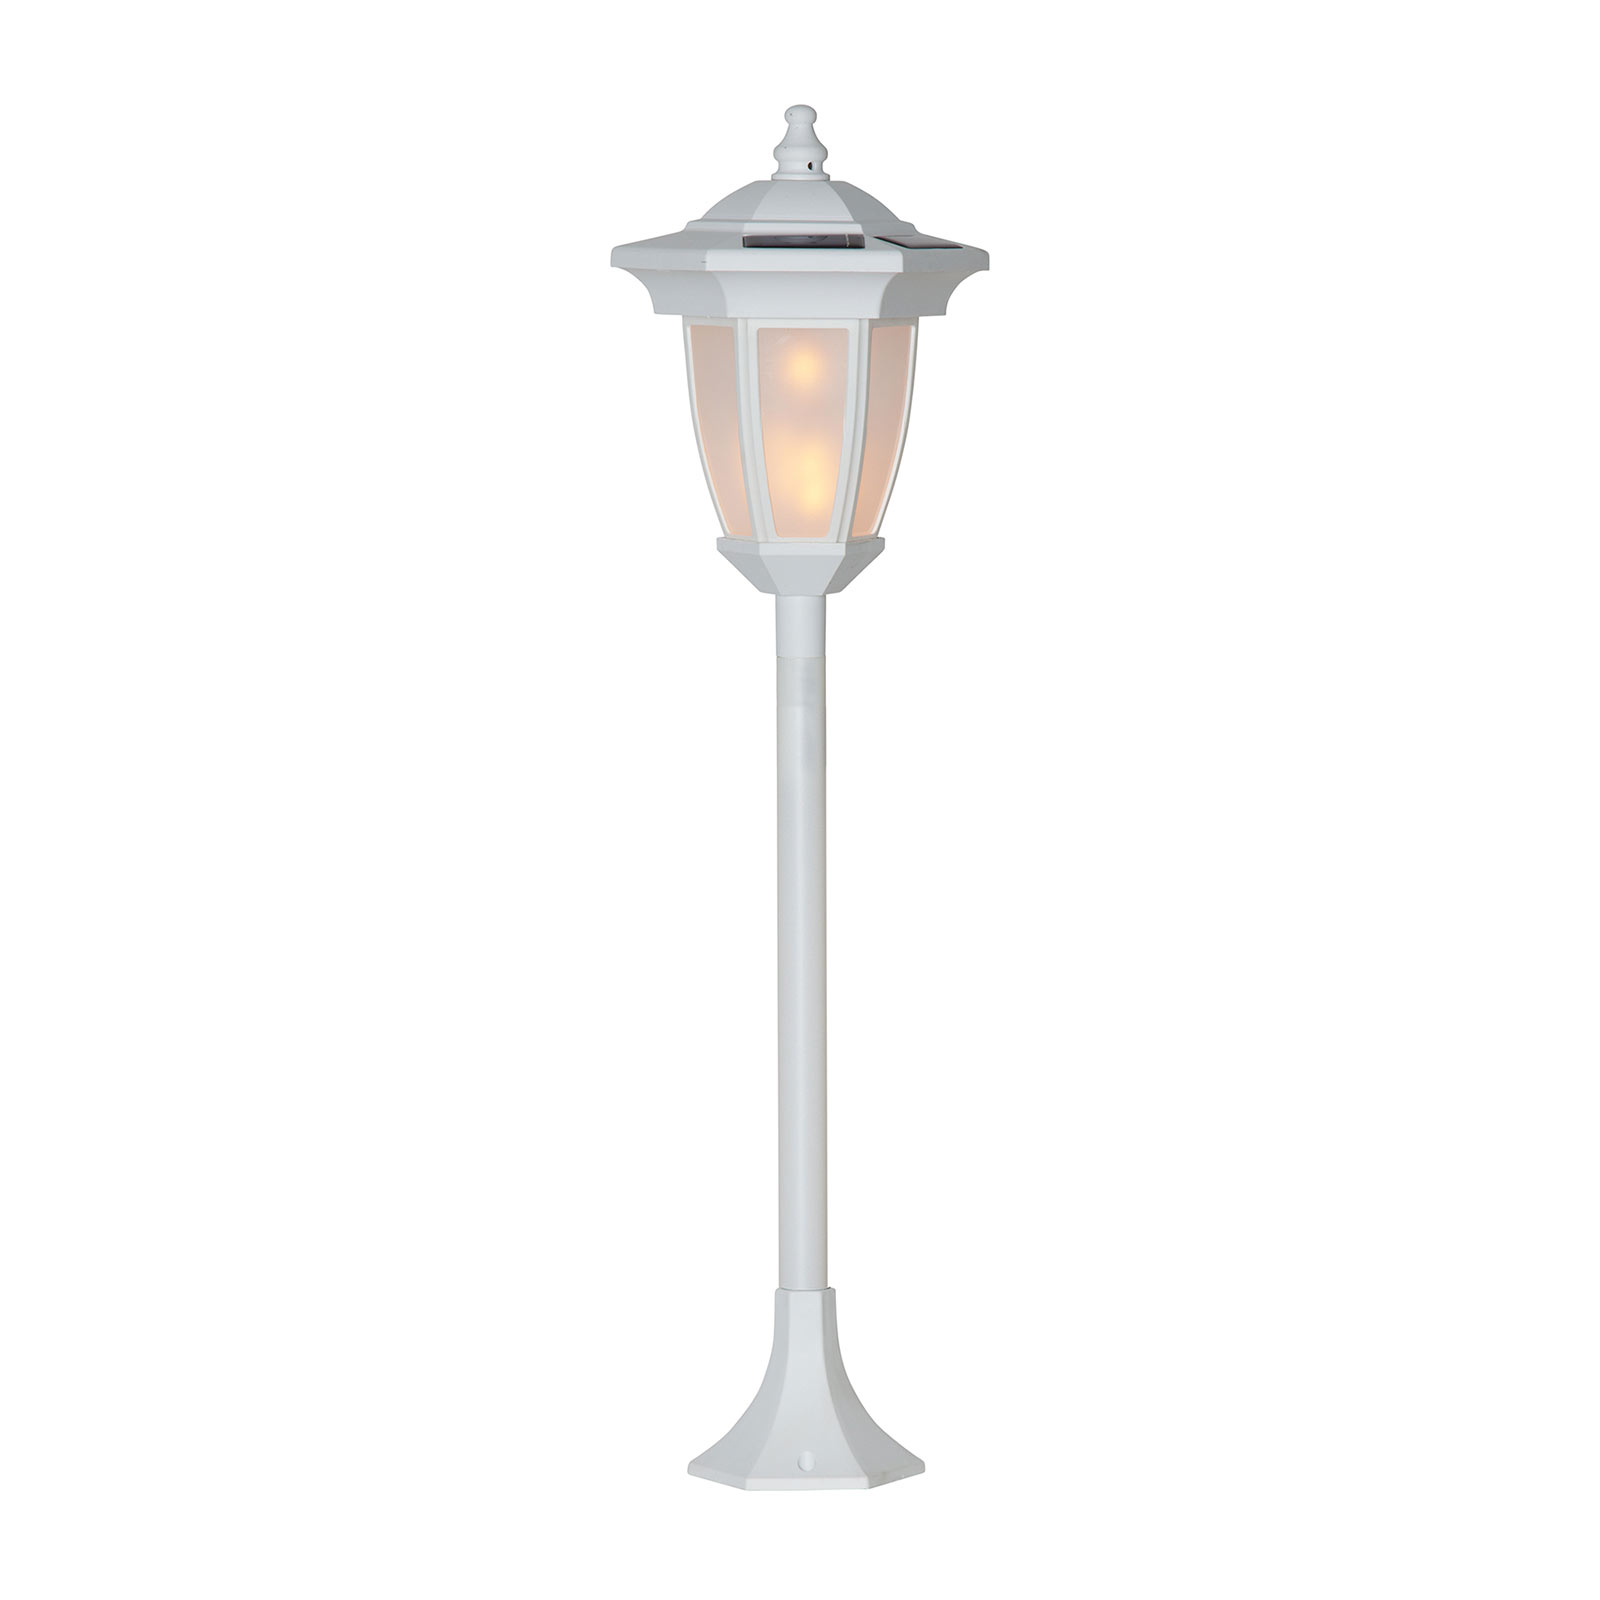 LED-Solarleuchte Flame, 4 in 1, weiß